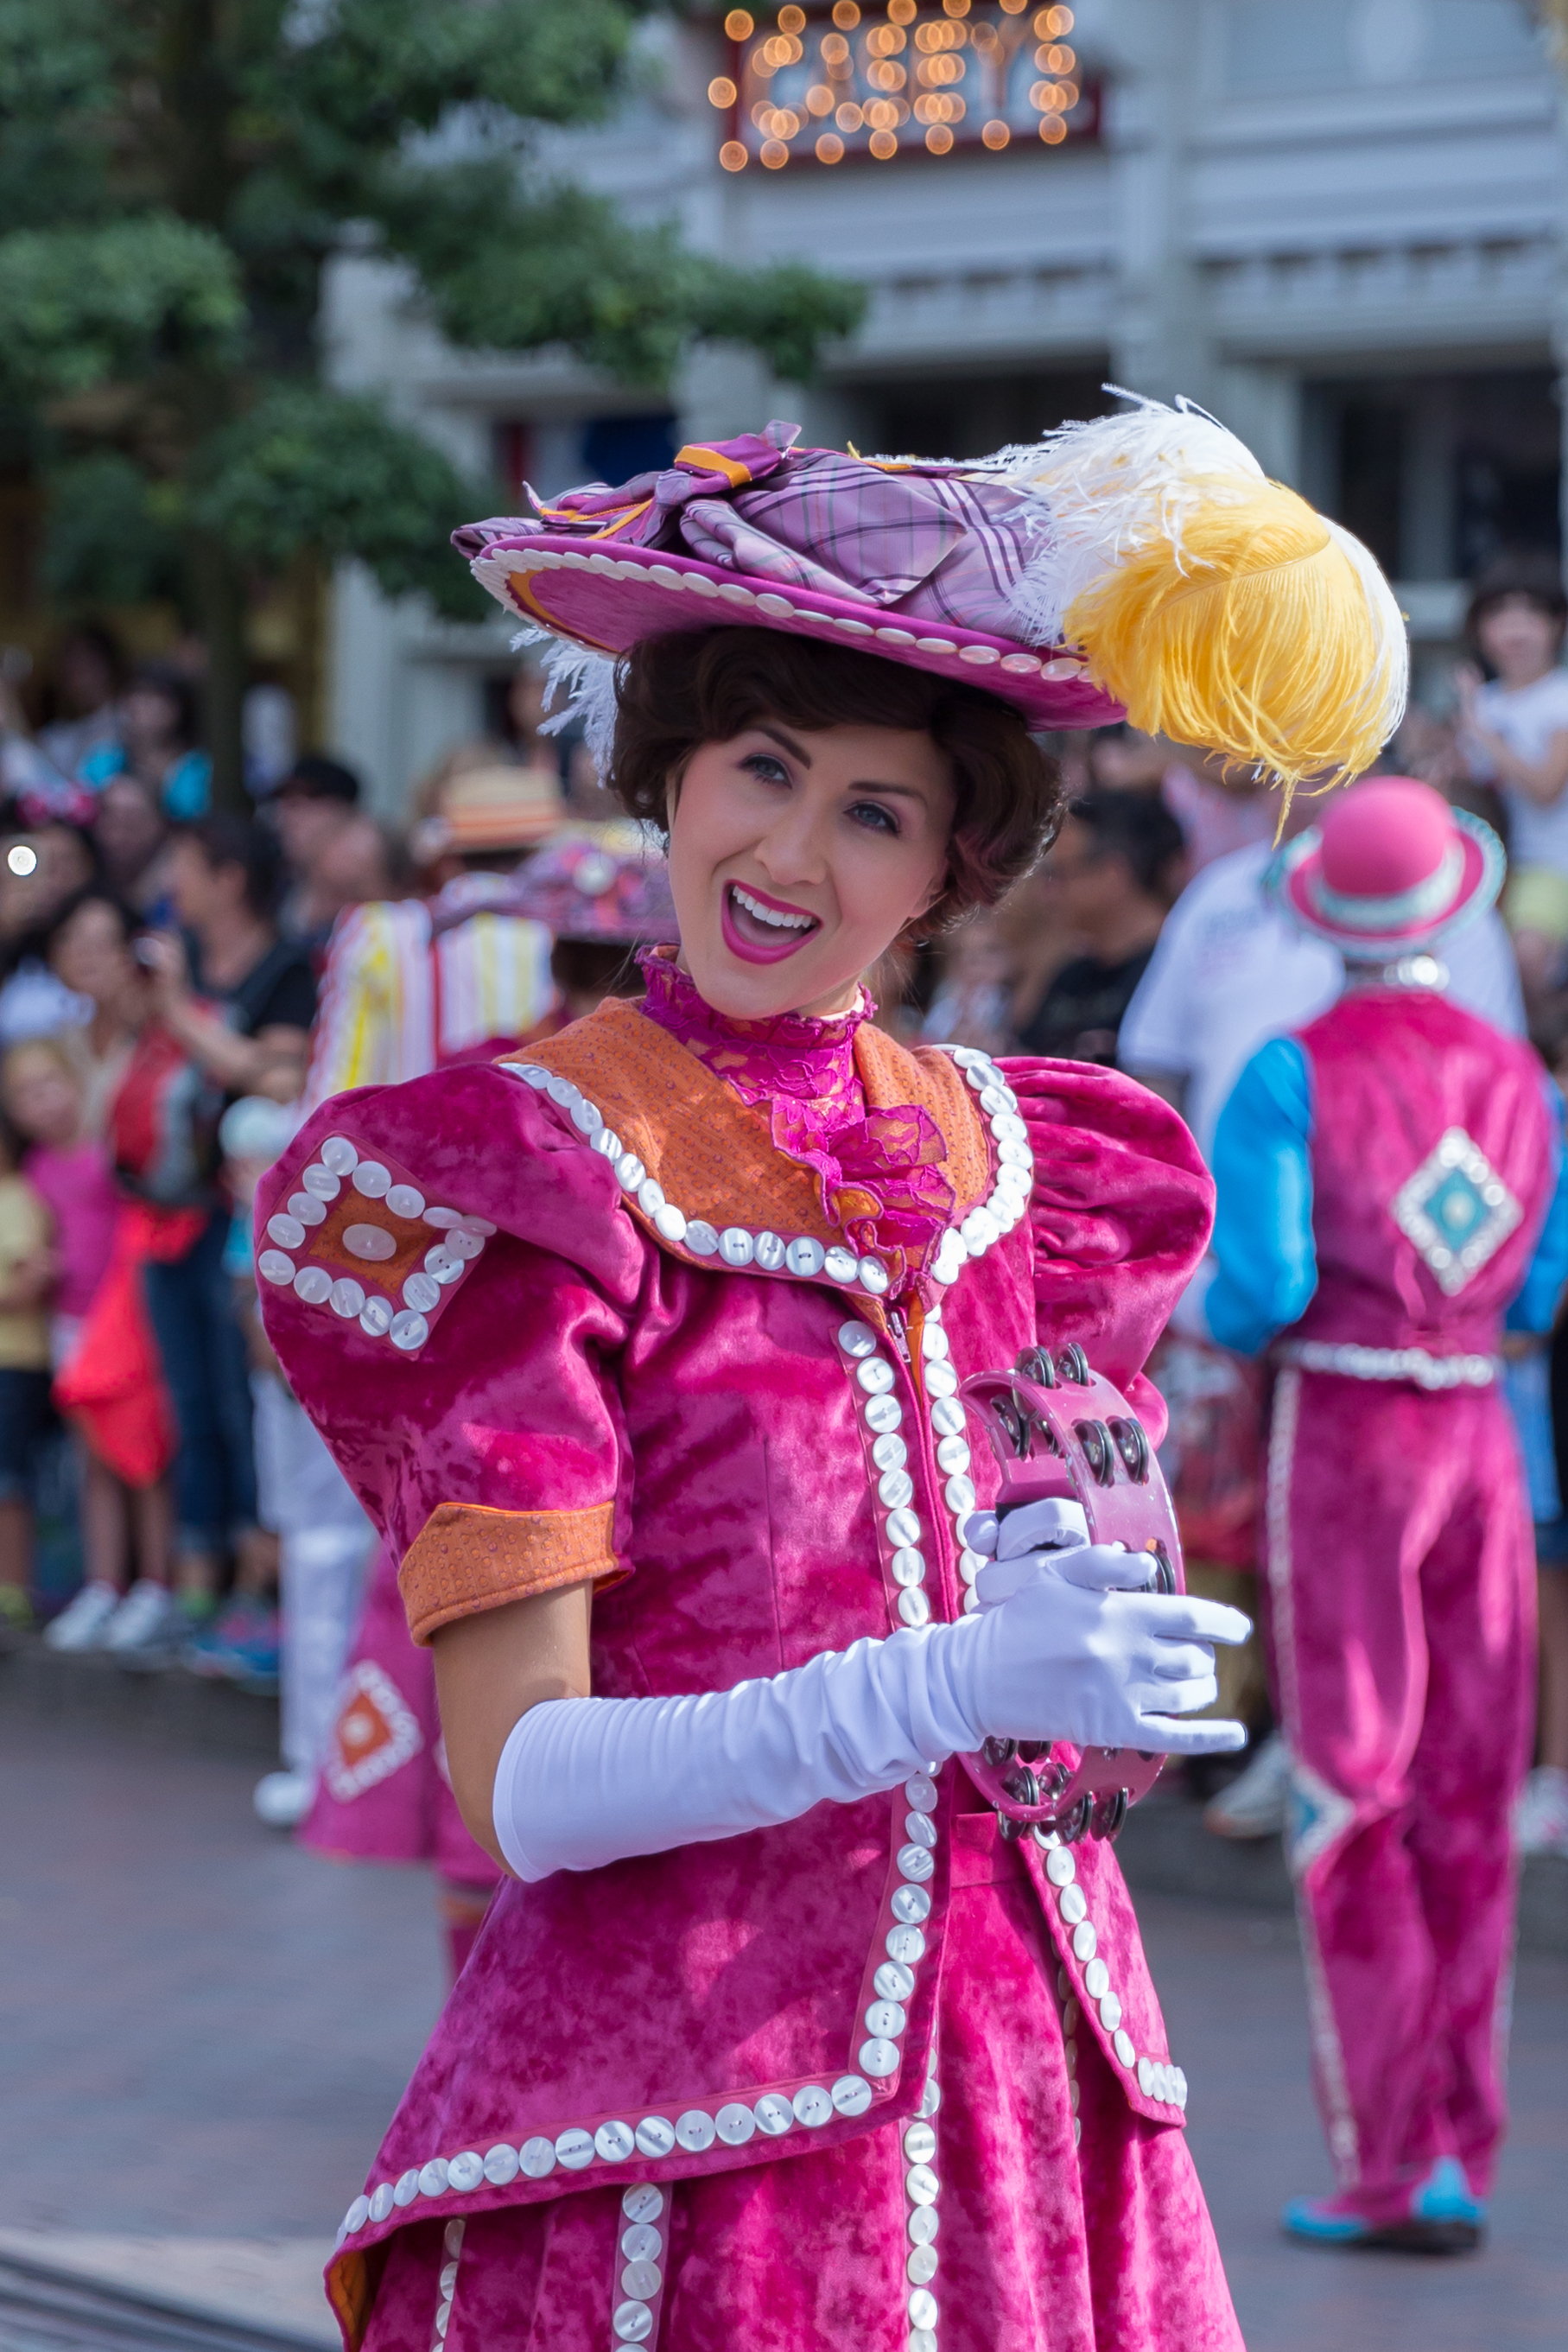 Personnage Disney - Mary Poppins - 20150804 16h51 (10969)